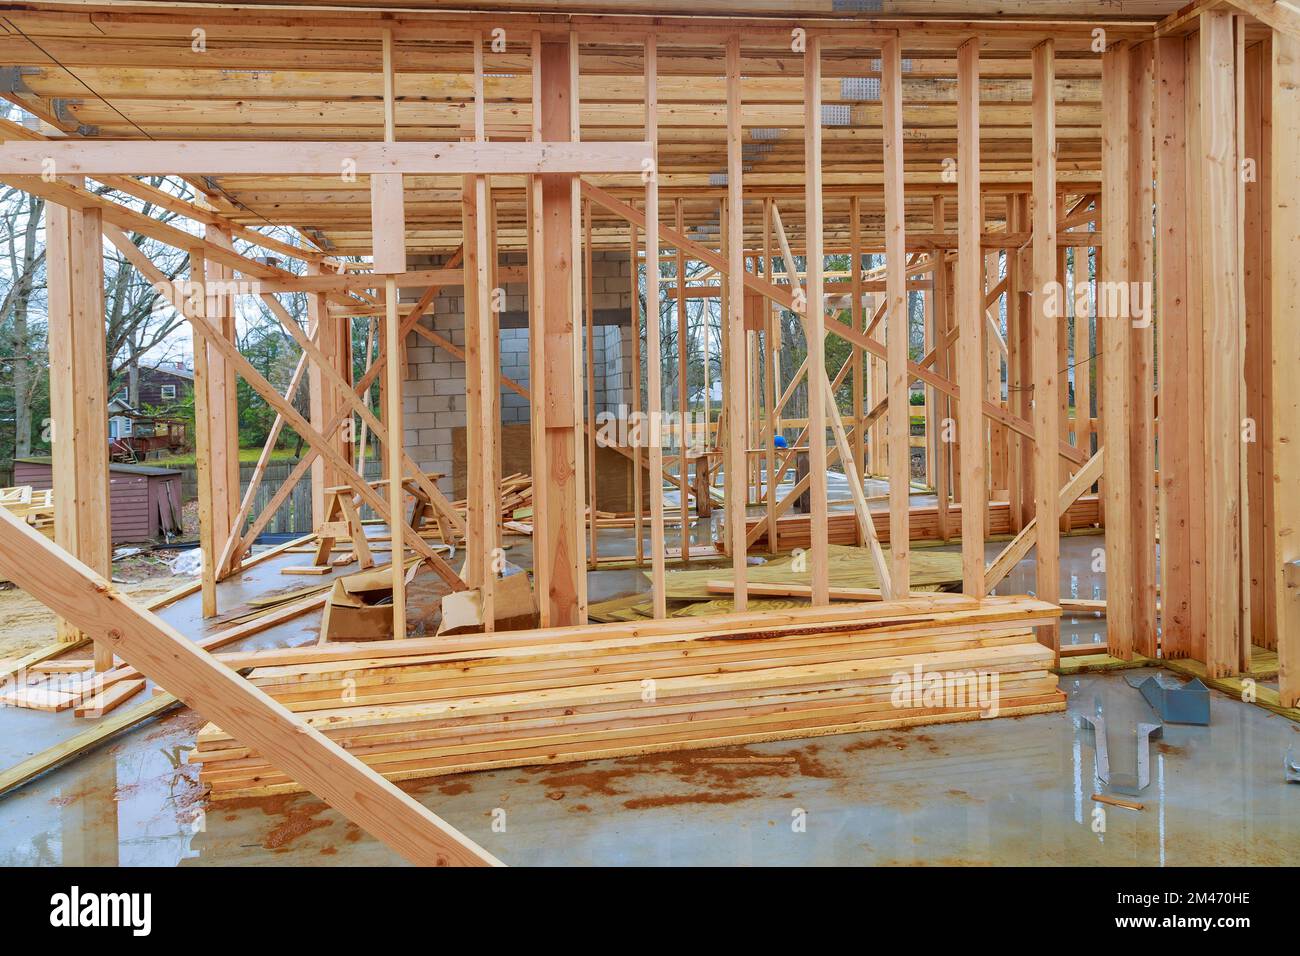 An view of timber framing beams framework in a built new house under construction Stock Photo